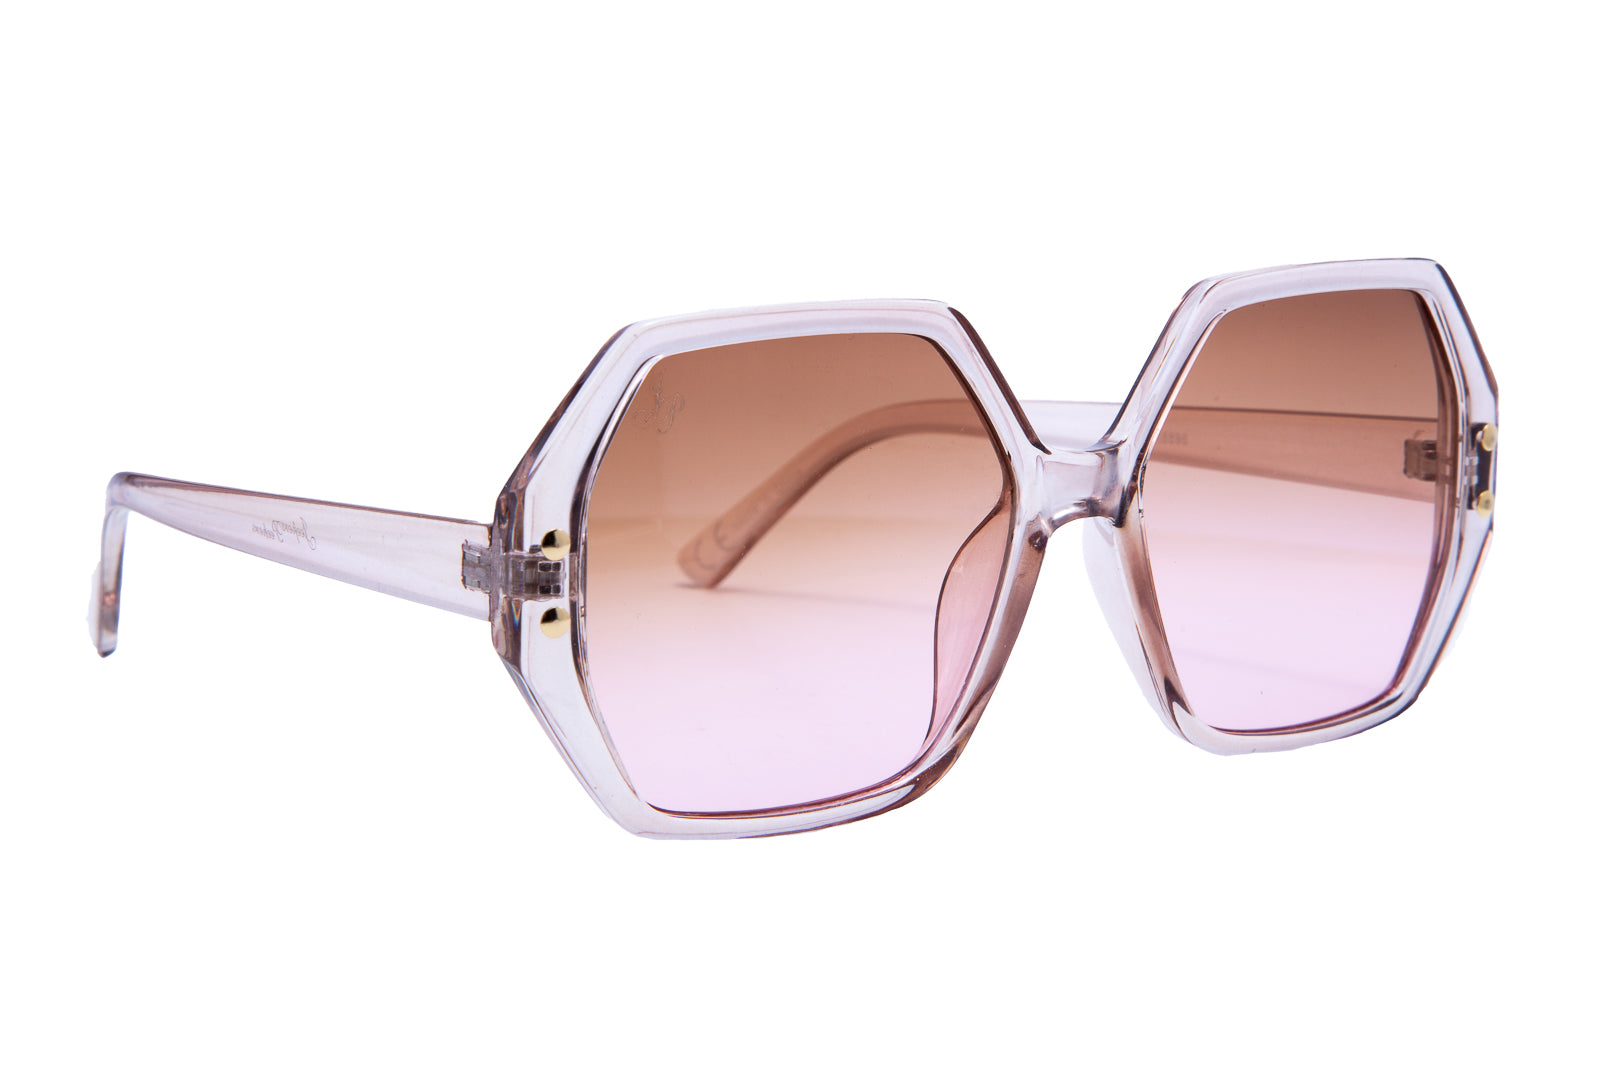 BEIGE HEXAGON FRAMES WITH PINK LENSES